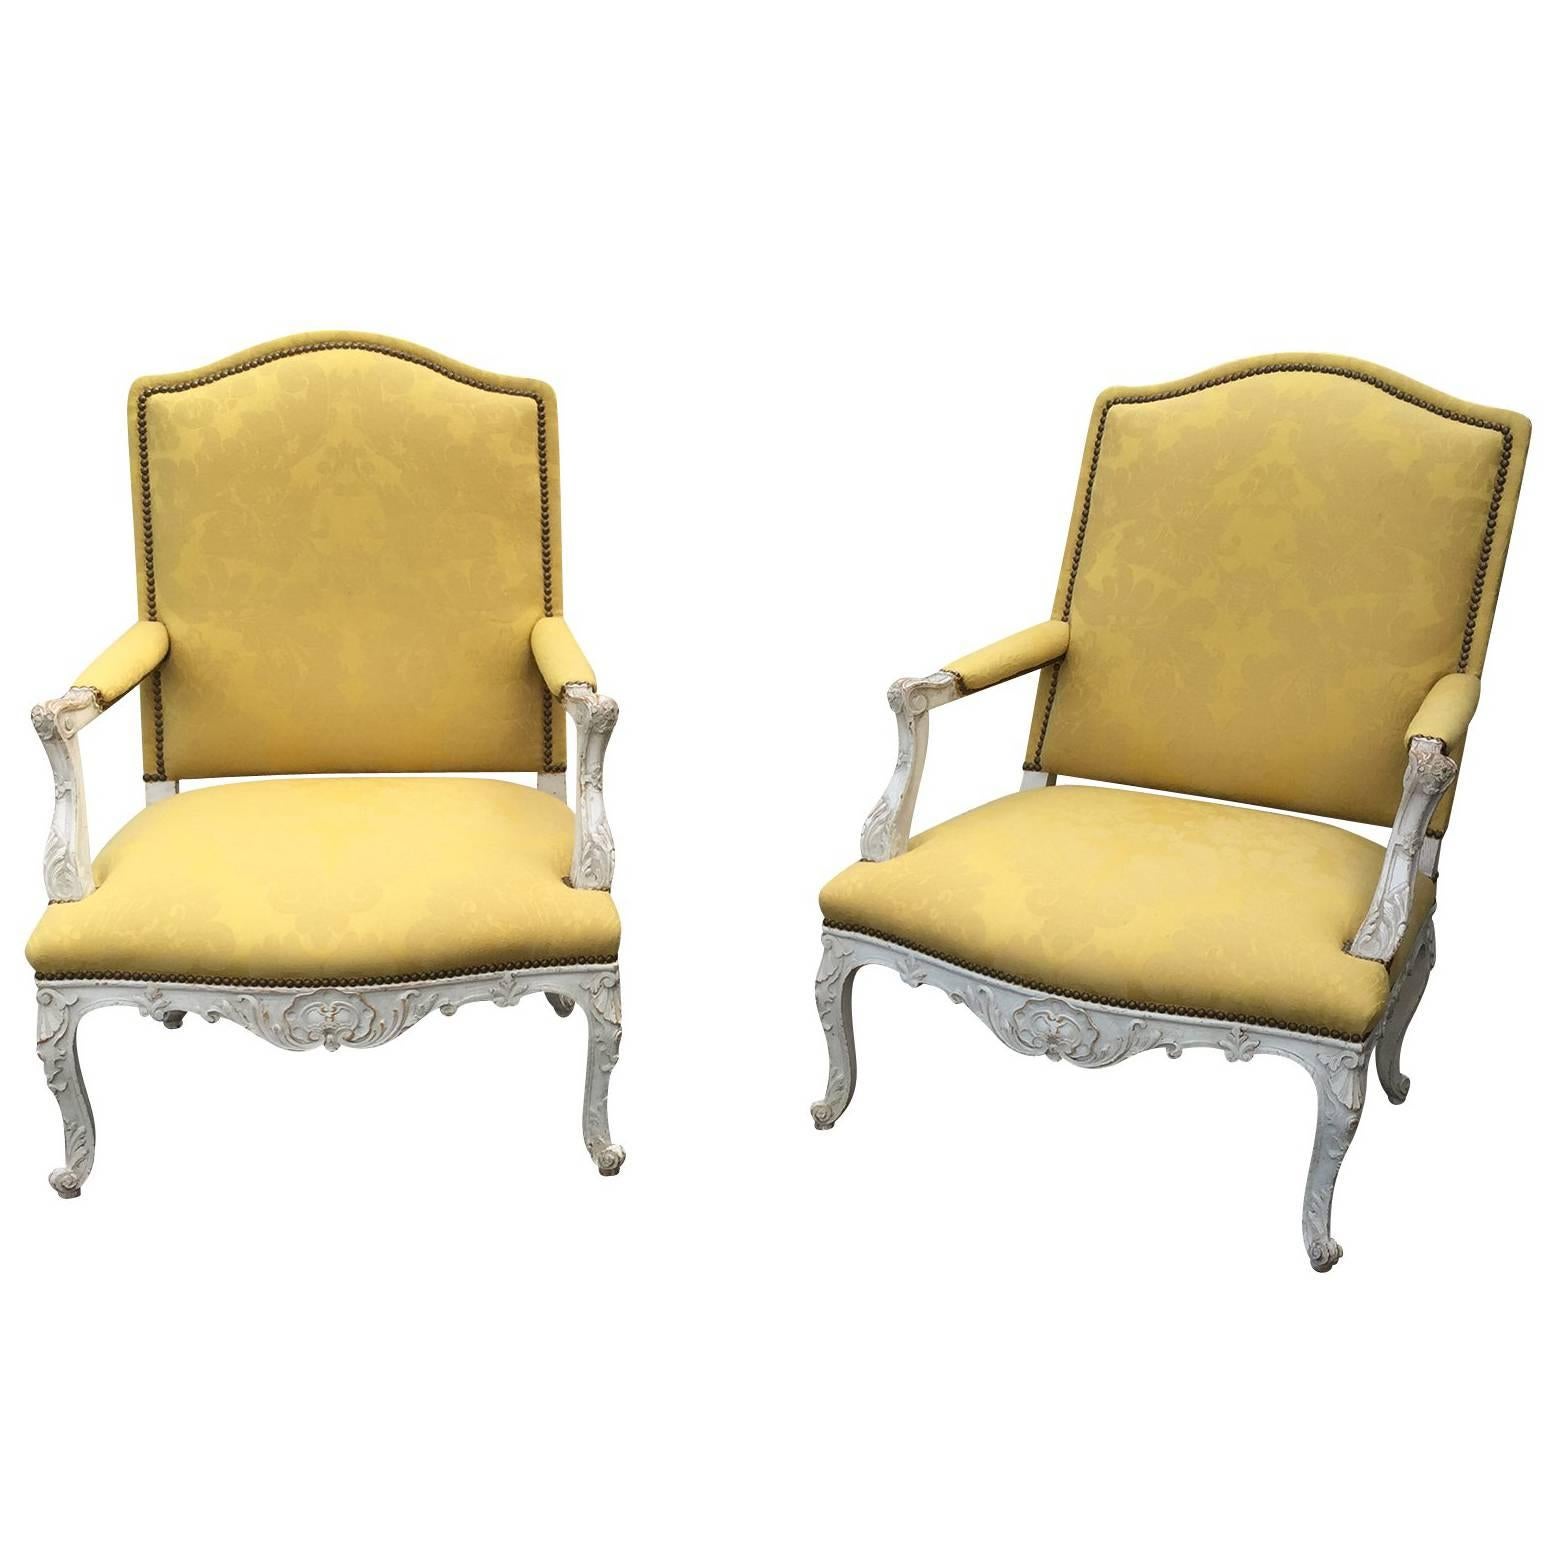 Pair of Large 19th Century, Regence Style Armchairs